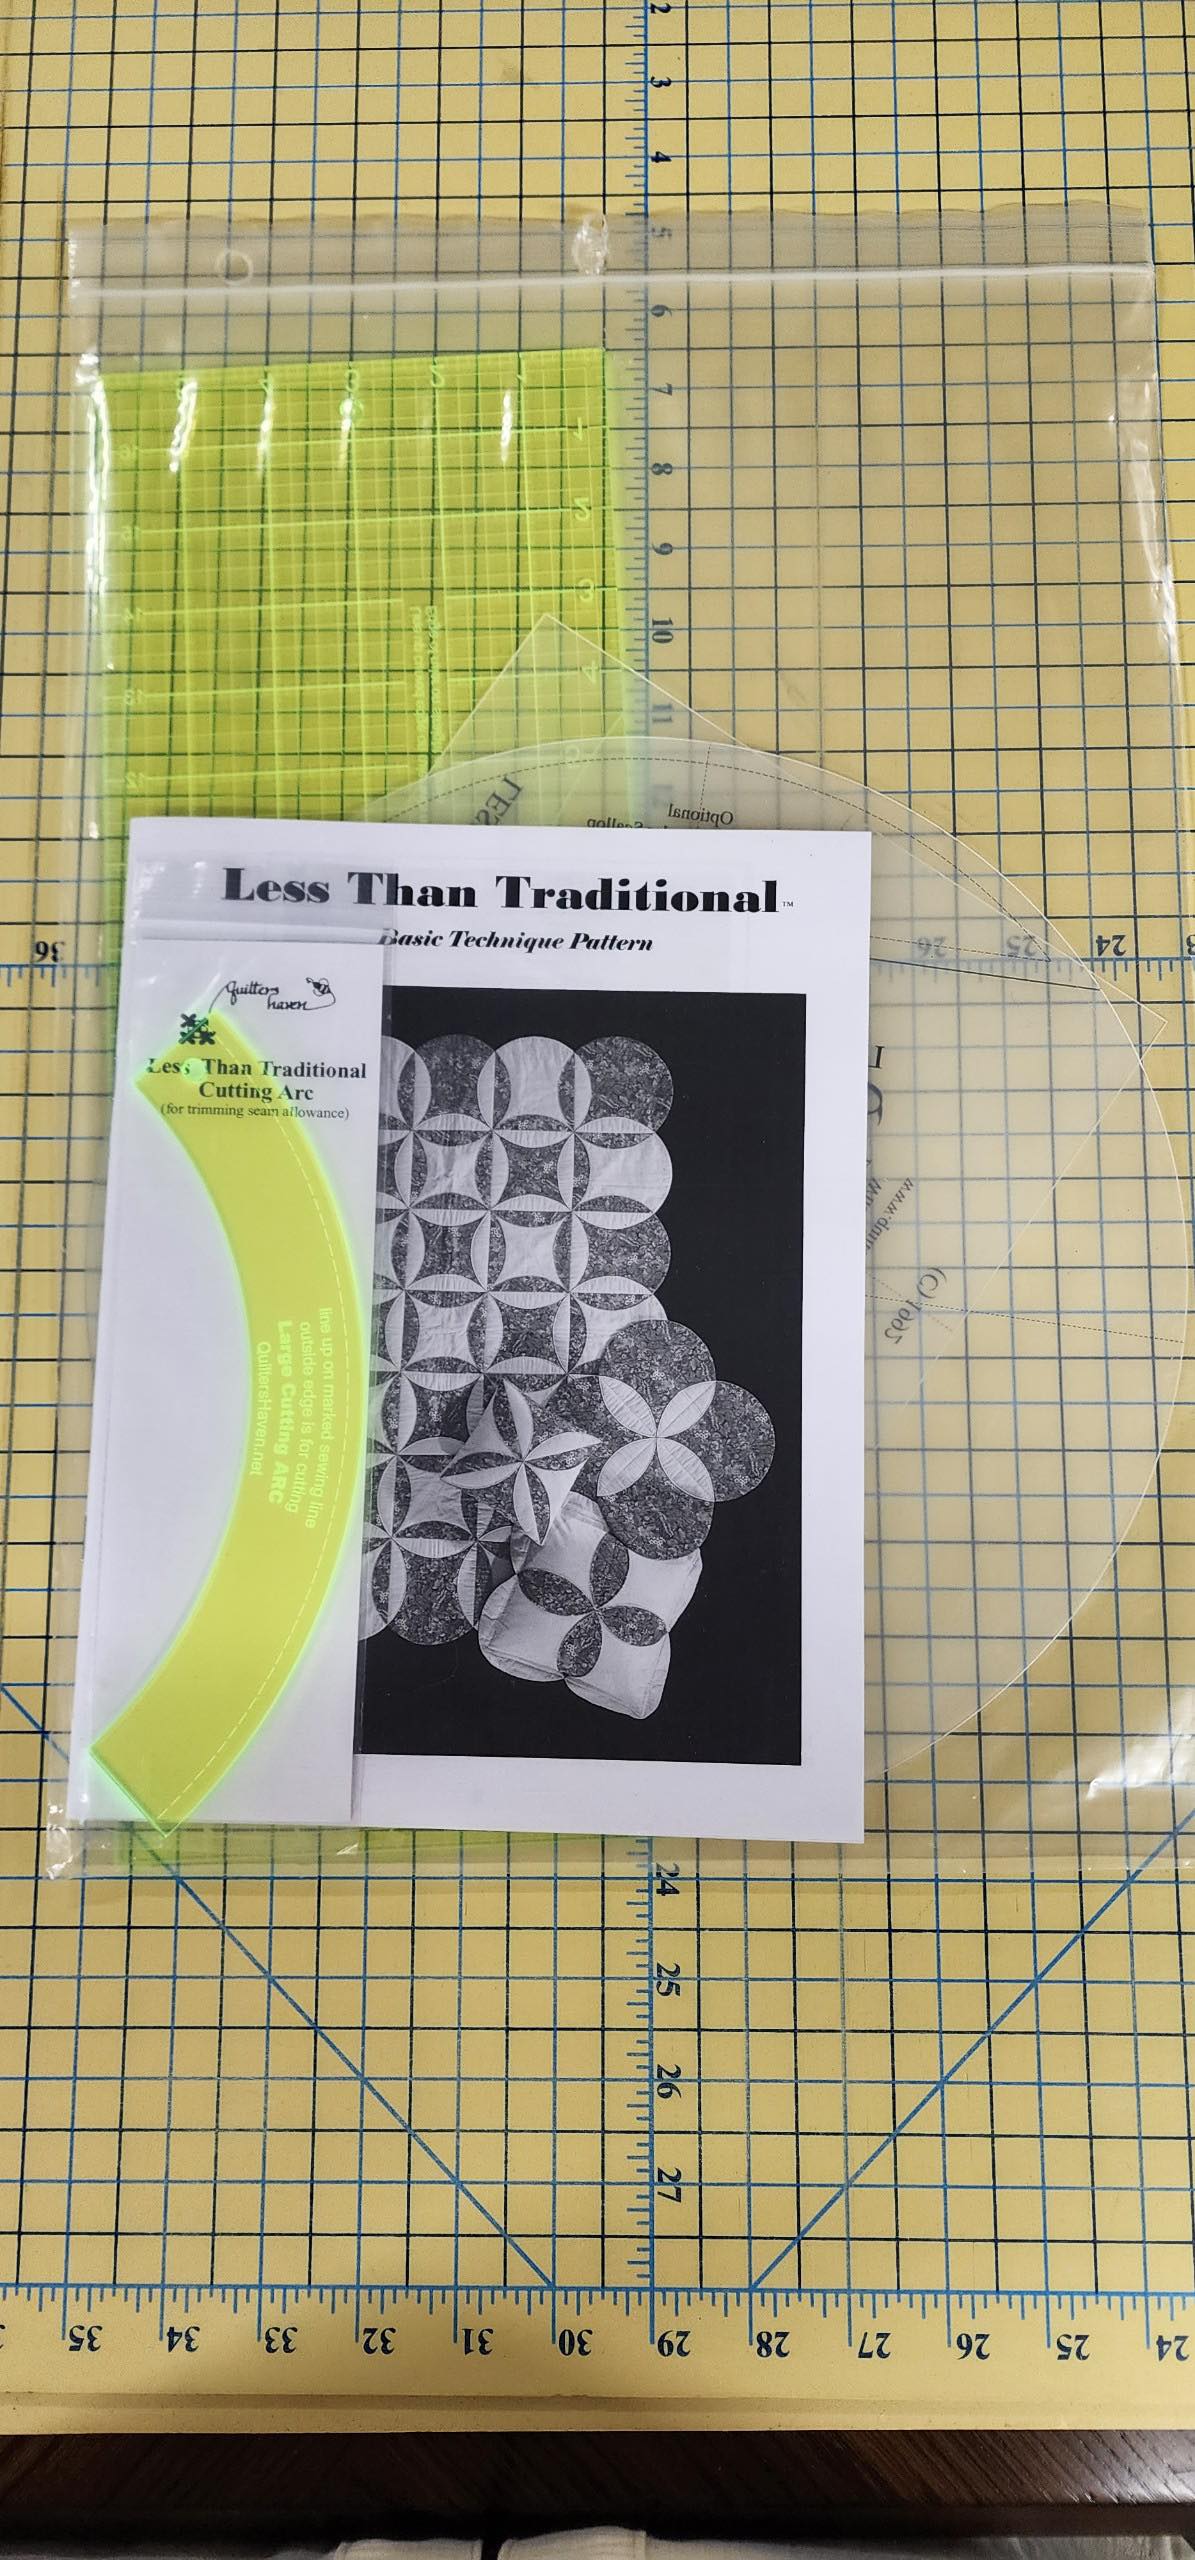 Less Than Traditional Large Basic Template Set QHBS-1001